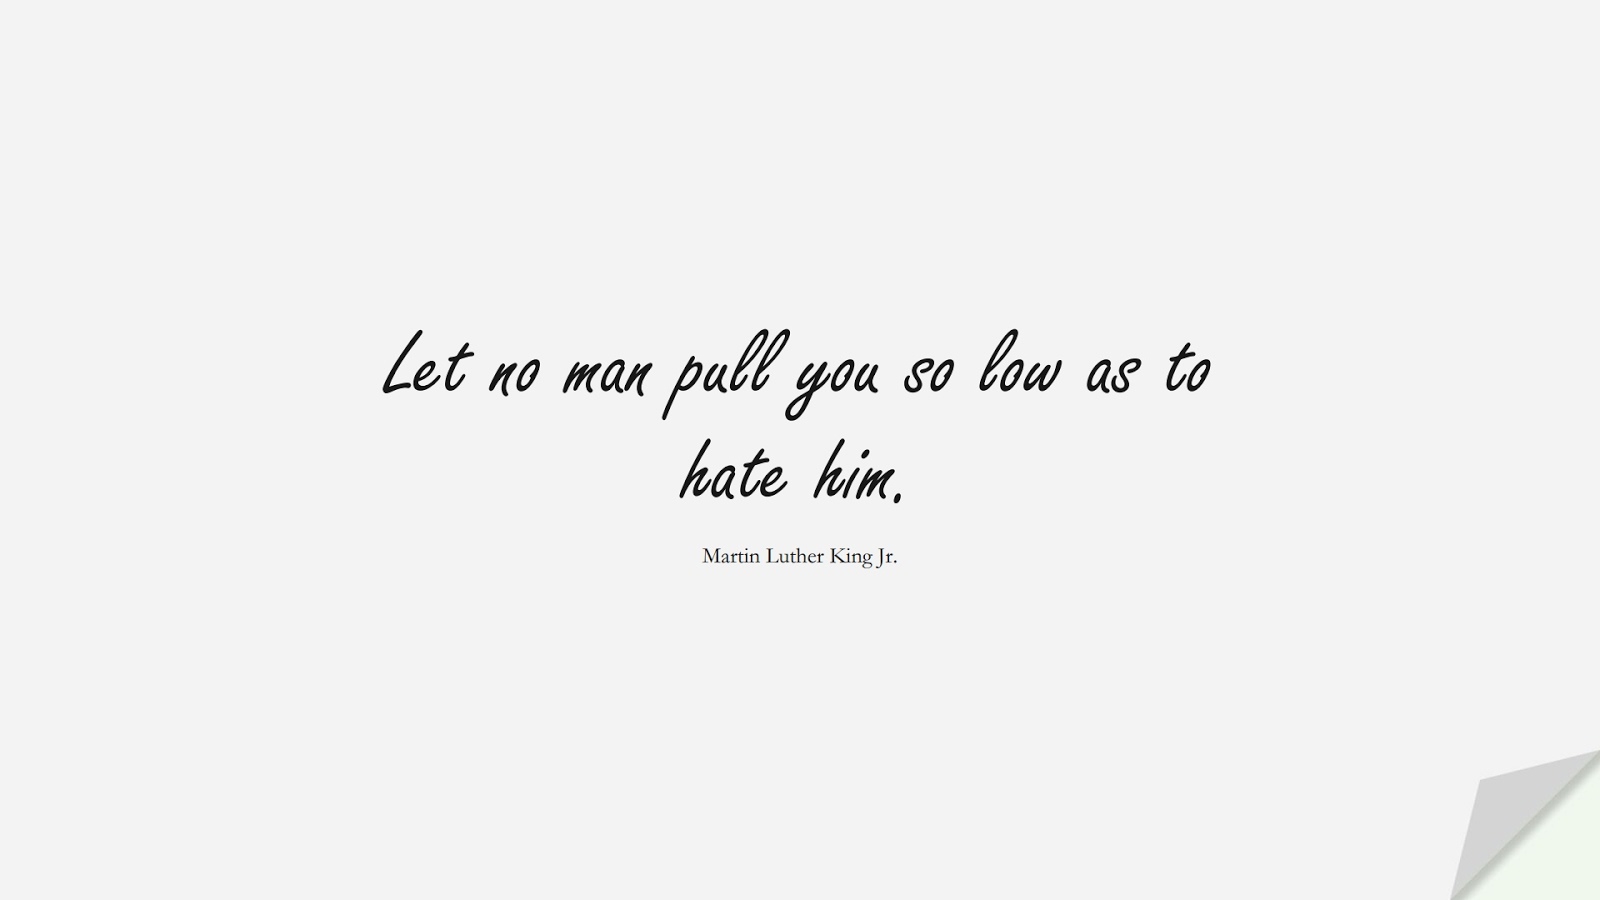 Let no man pull you so low as to hate him. (Martin Luther King Jr.);  #MartinLutherKingJrQuotes